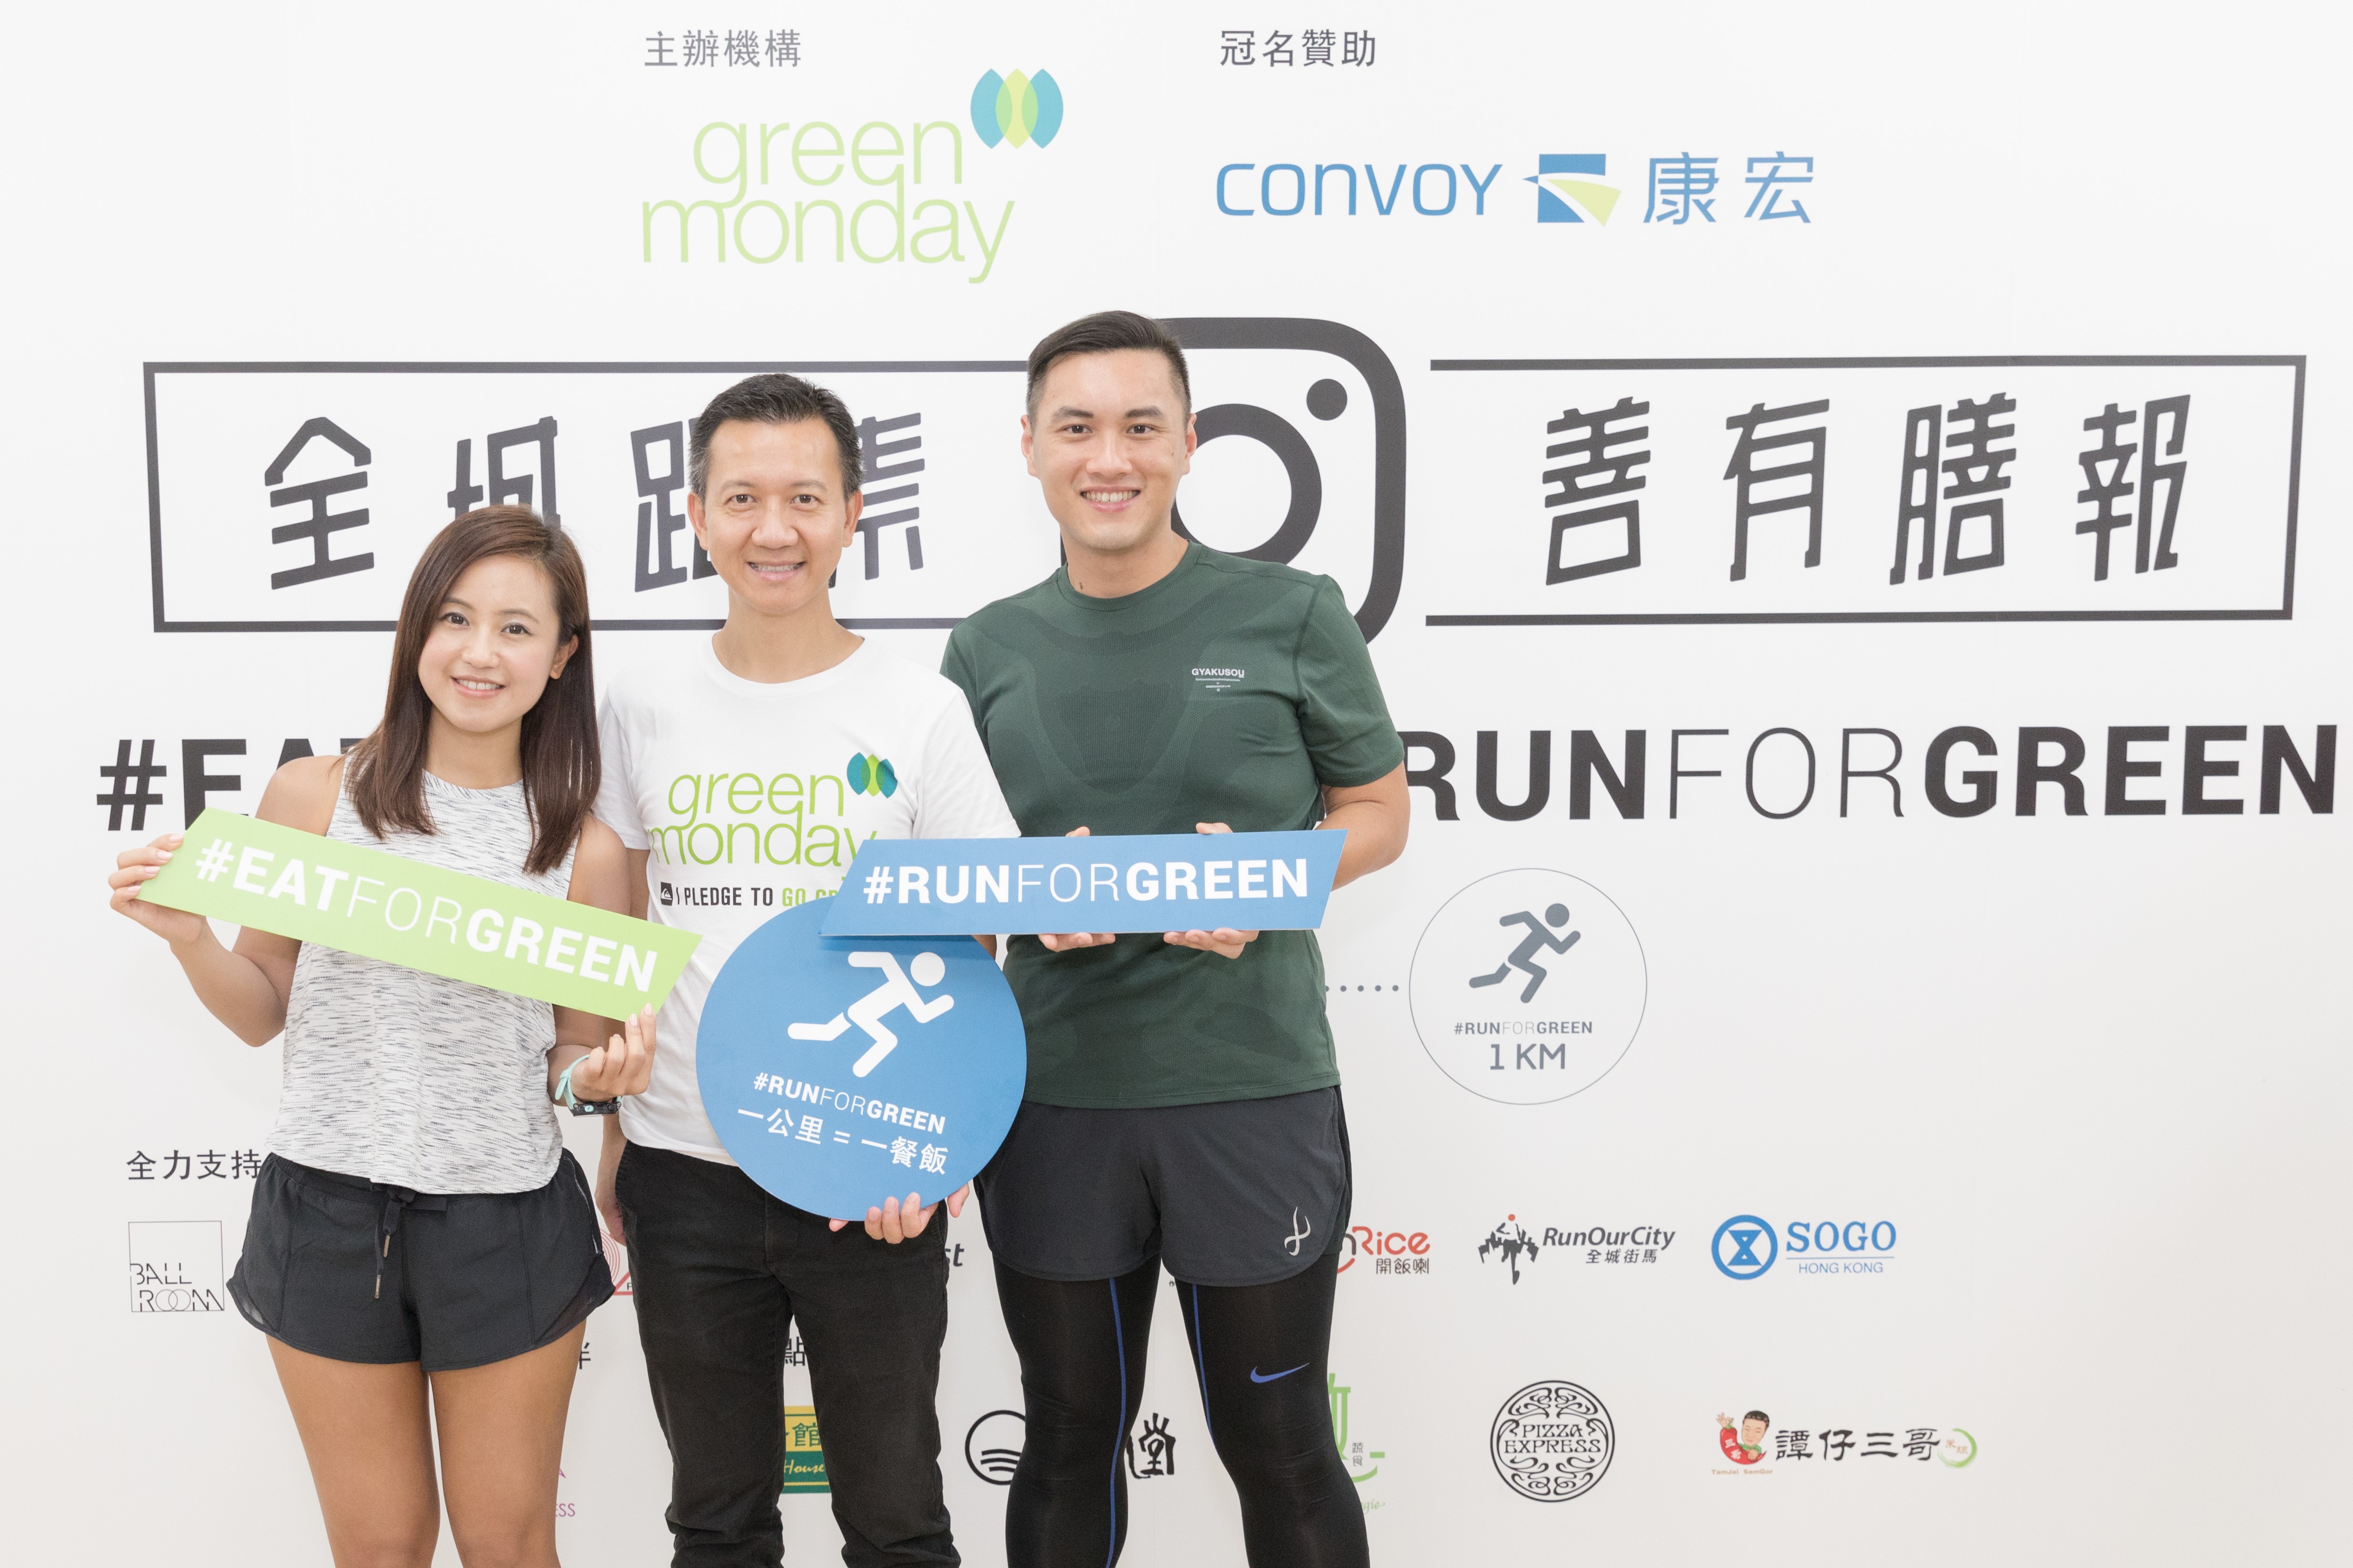 Convoy’s “Eat for Green. Run for Green.”